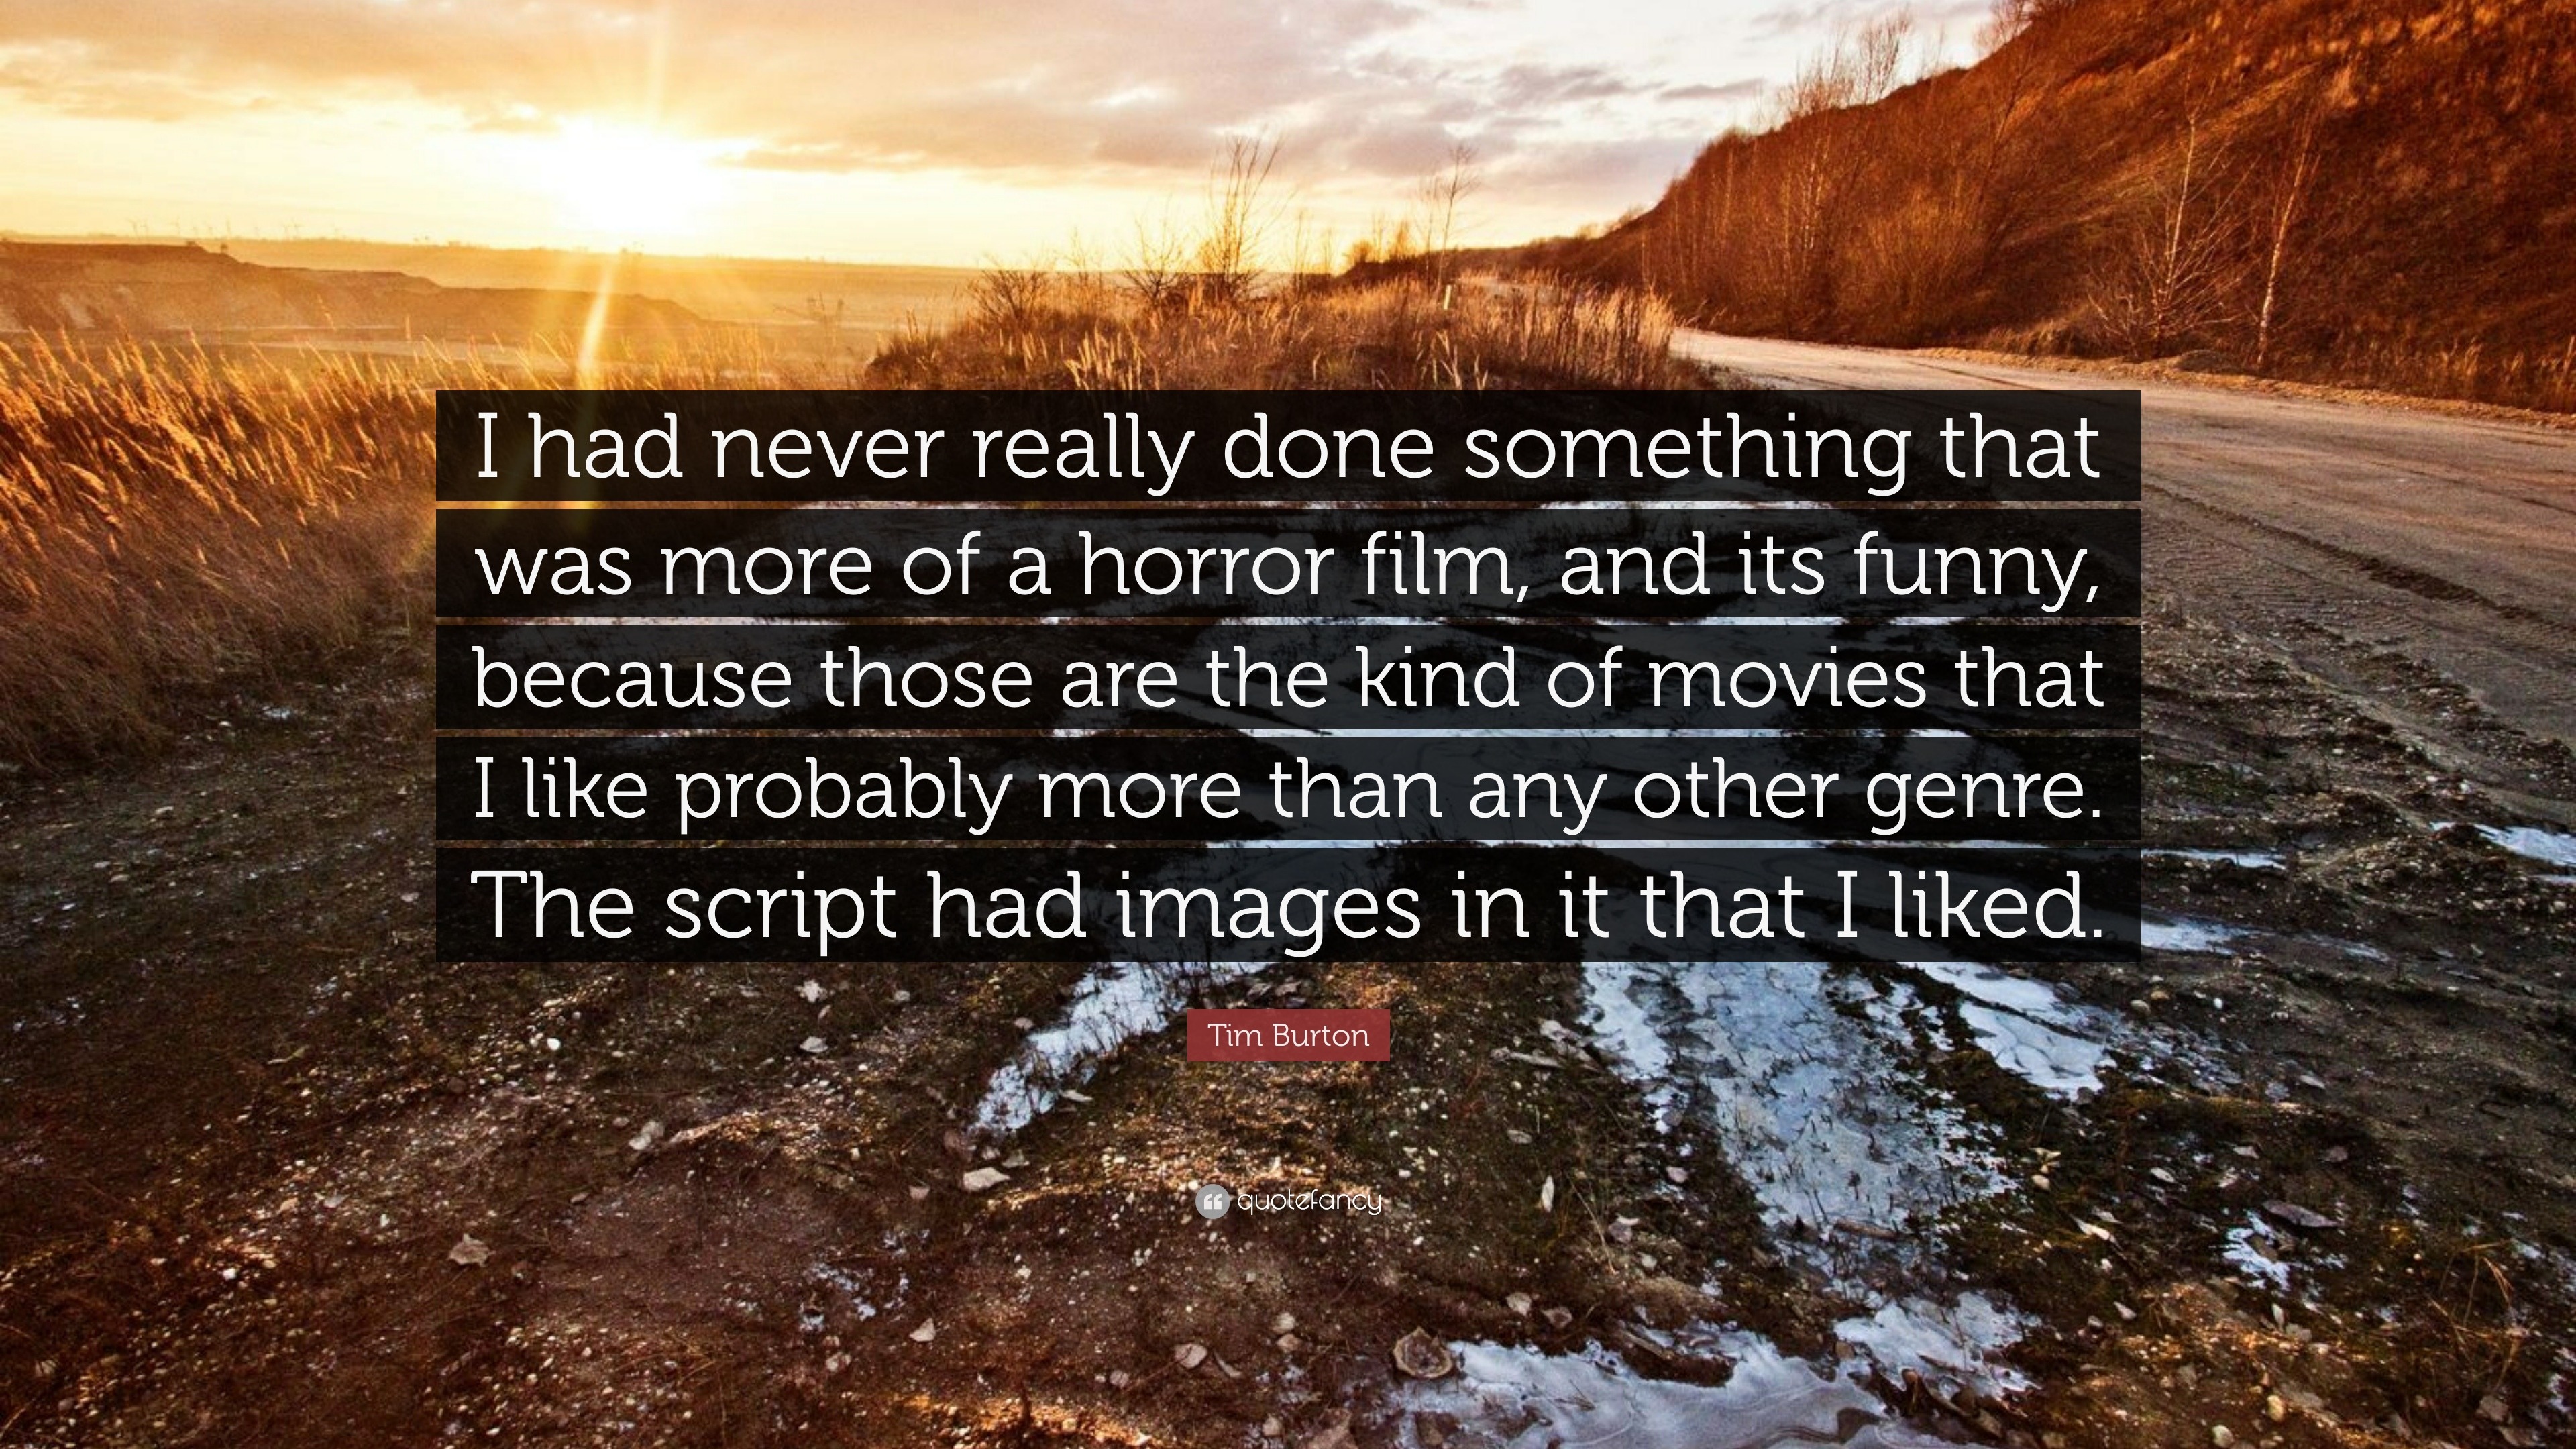 Tim Burton Quote: “I had never really done something that was more of a  horror film, and its funny, because those are the kind of movies th...”